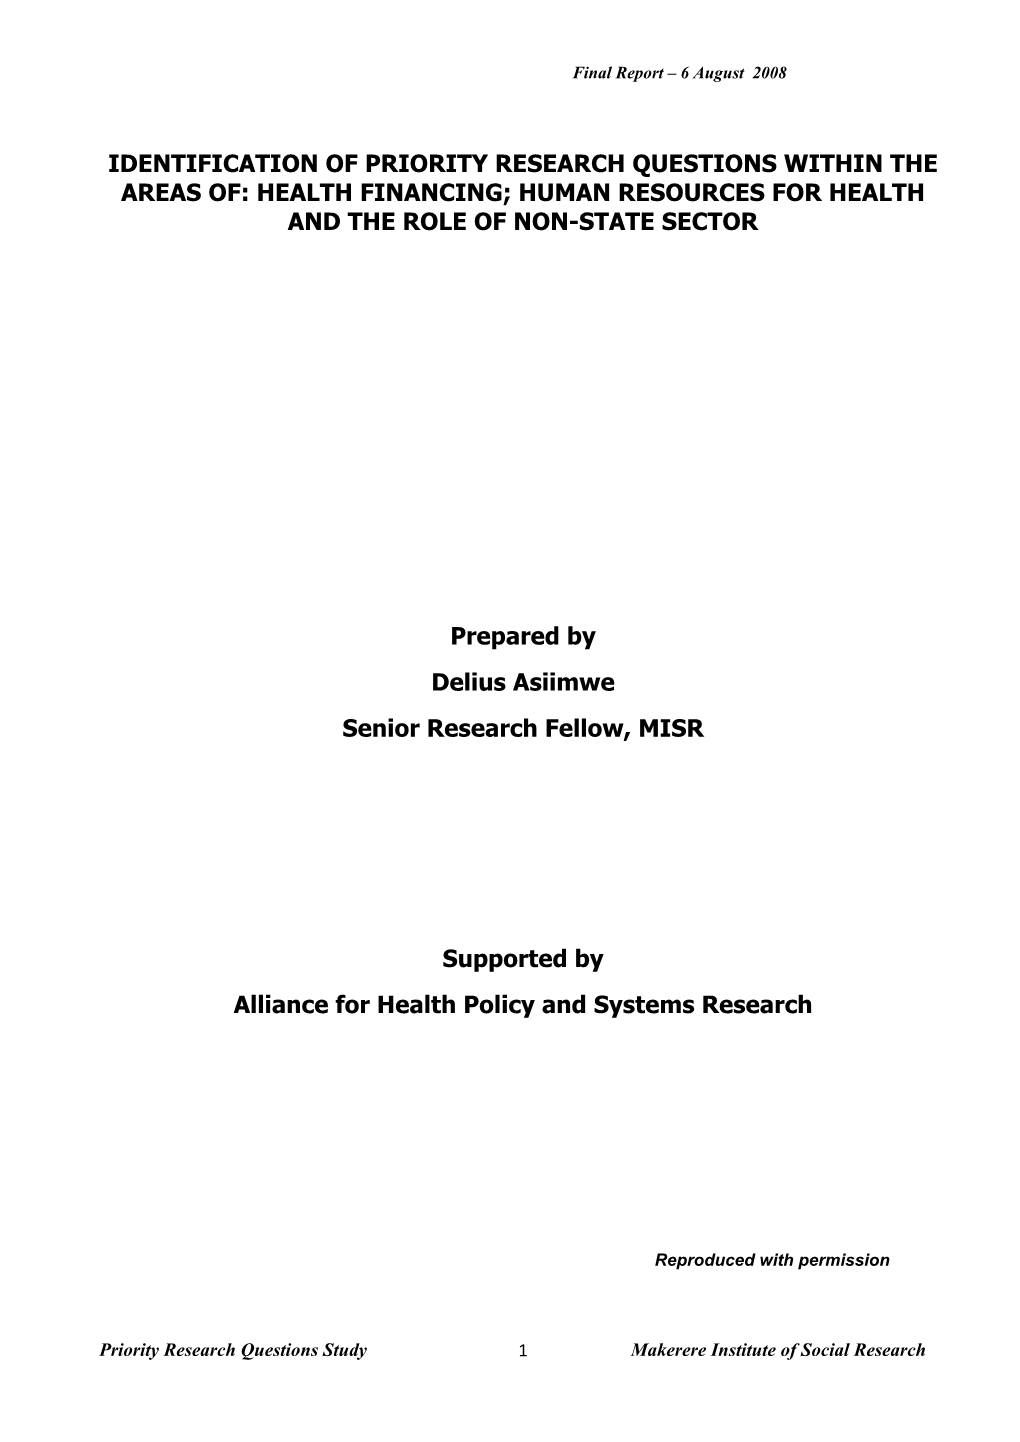 Identification of Priority Research Questions Within the Areas Of: Health Financing; Human Resources for Health and the Role of Non-State Sector